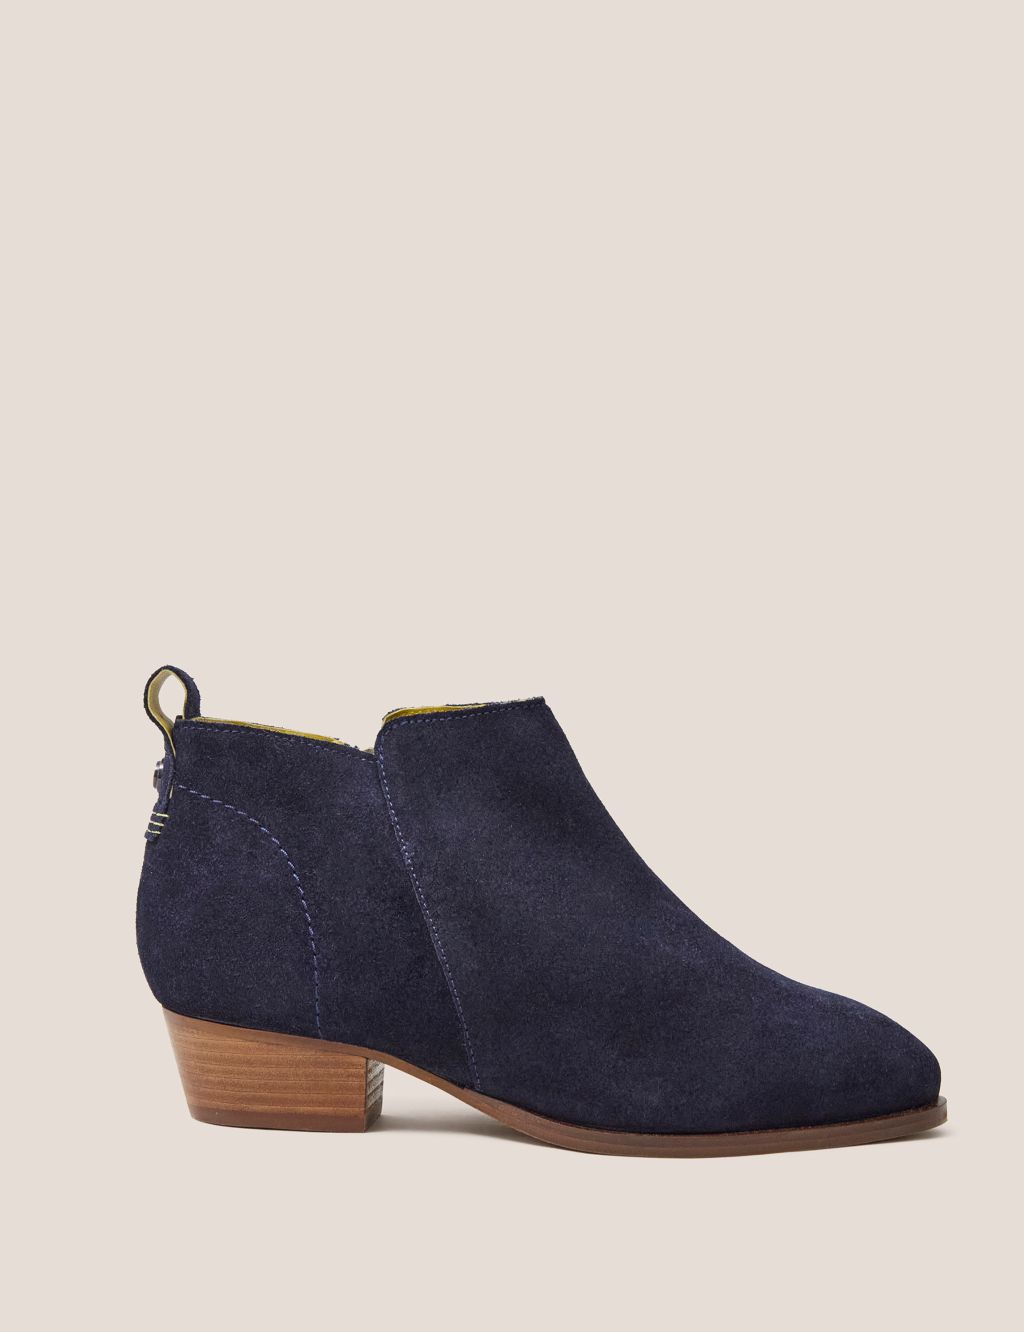 Wide Fit Suede Block Heel Ankle Boots